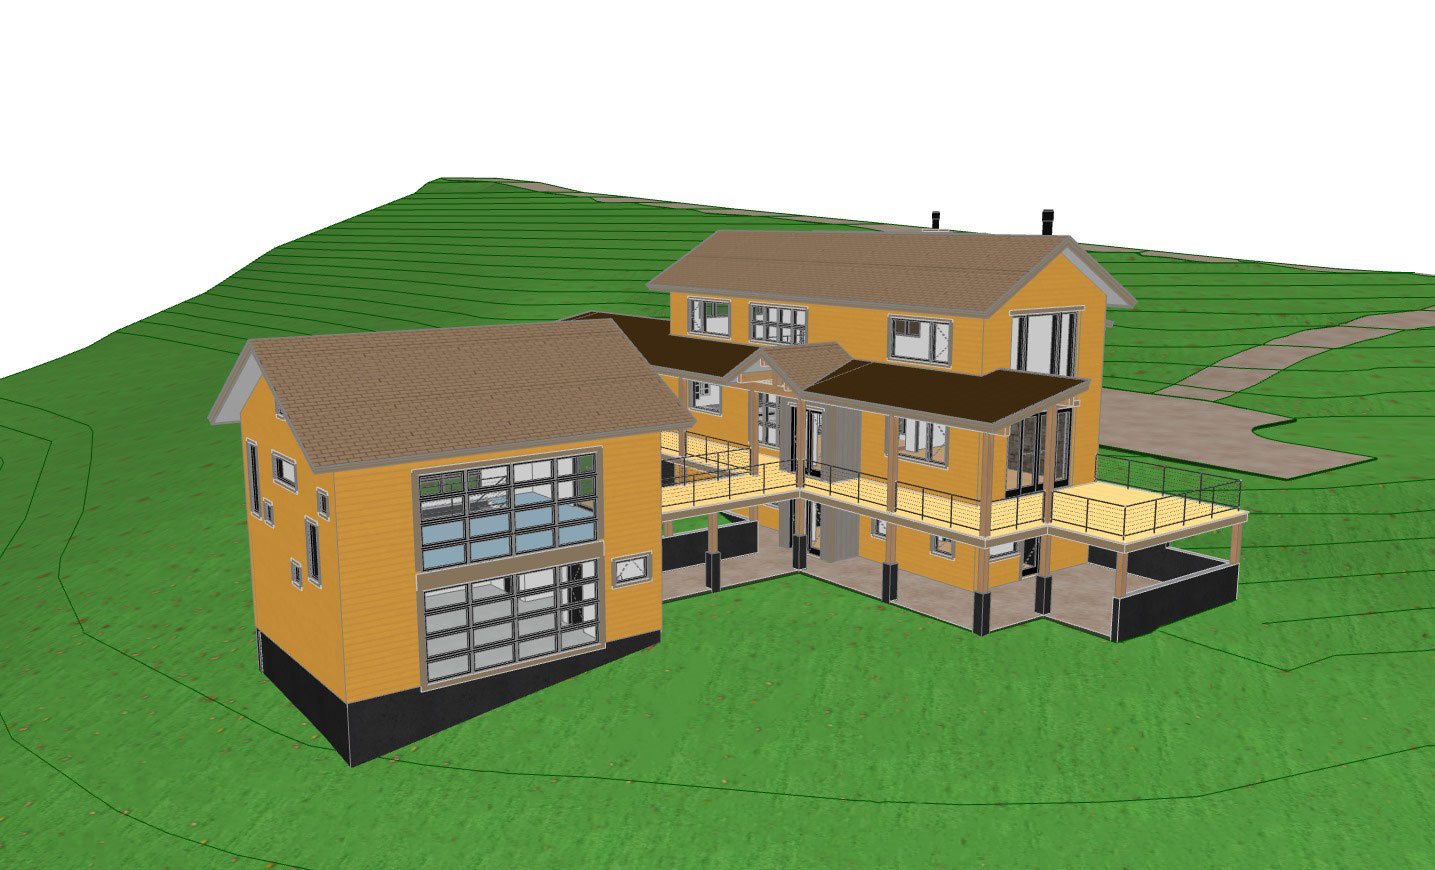 Closer view of a home rendering with a dojo